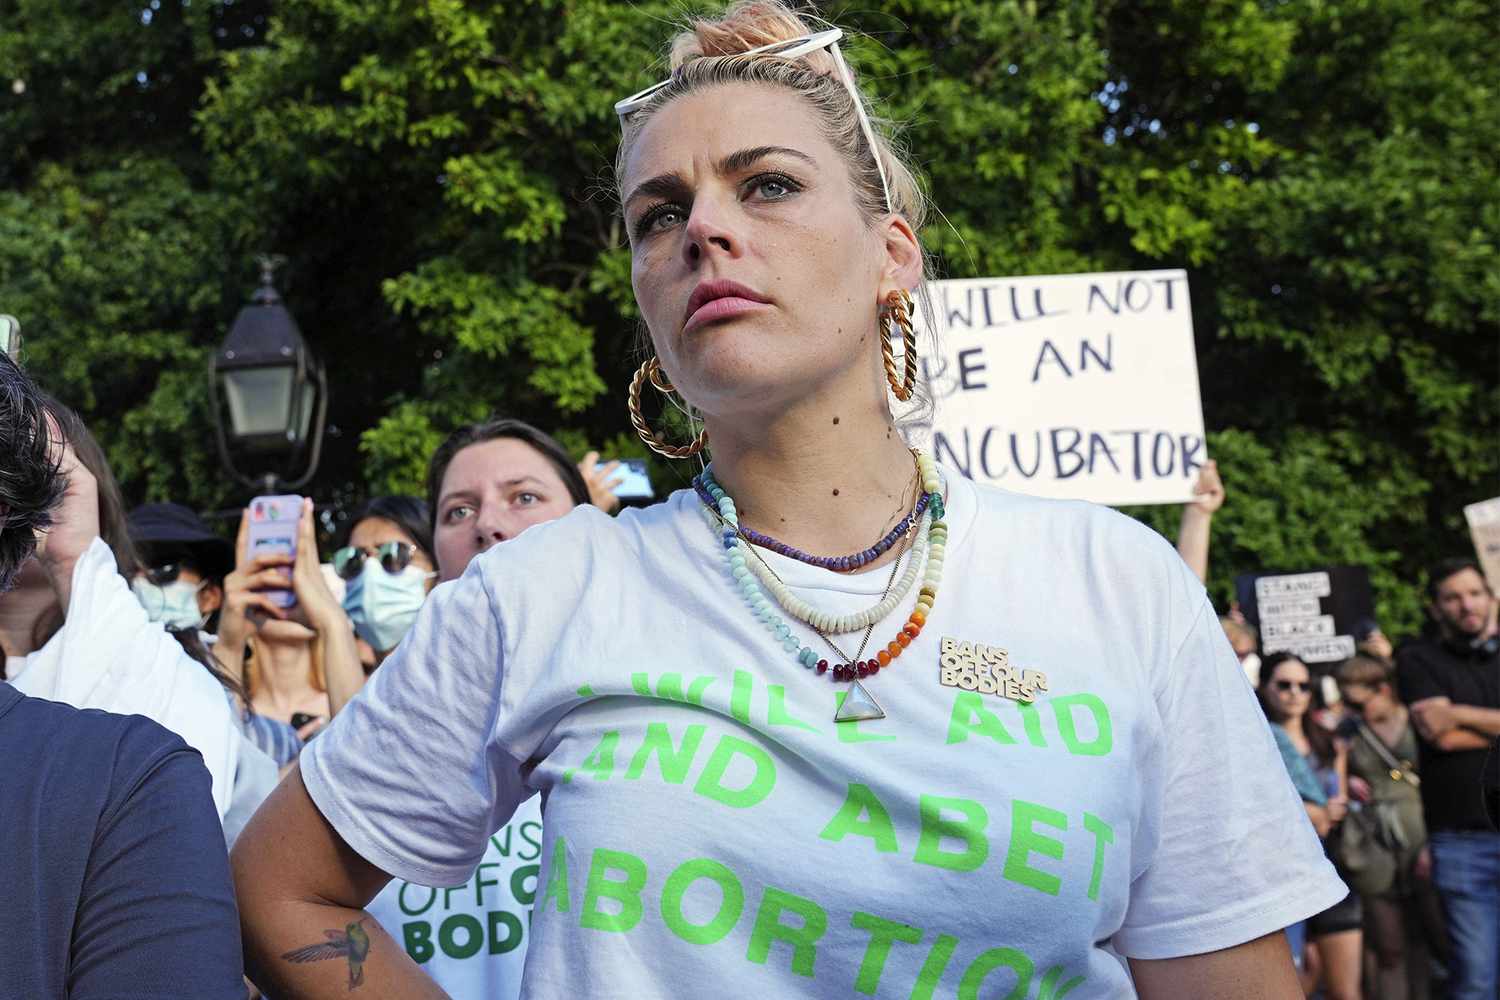 Photo by: John Nacion/STAR MAX/IPx 2022 6/24/22 Busy Philipps at a protest against the Supreme Court decision to overturn Roe v. Wade.